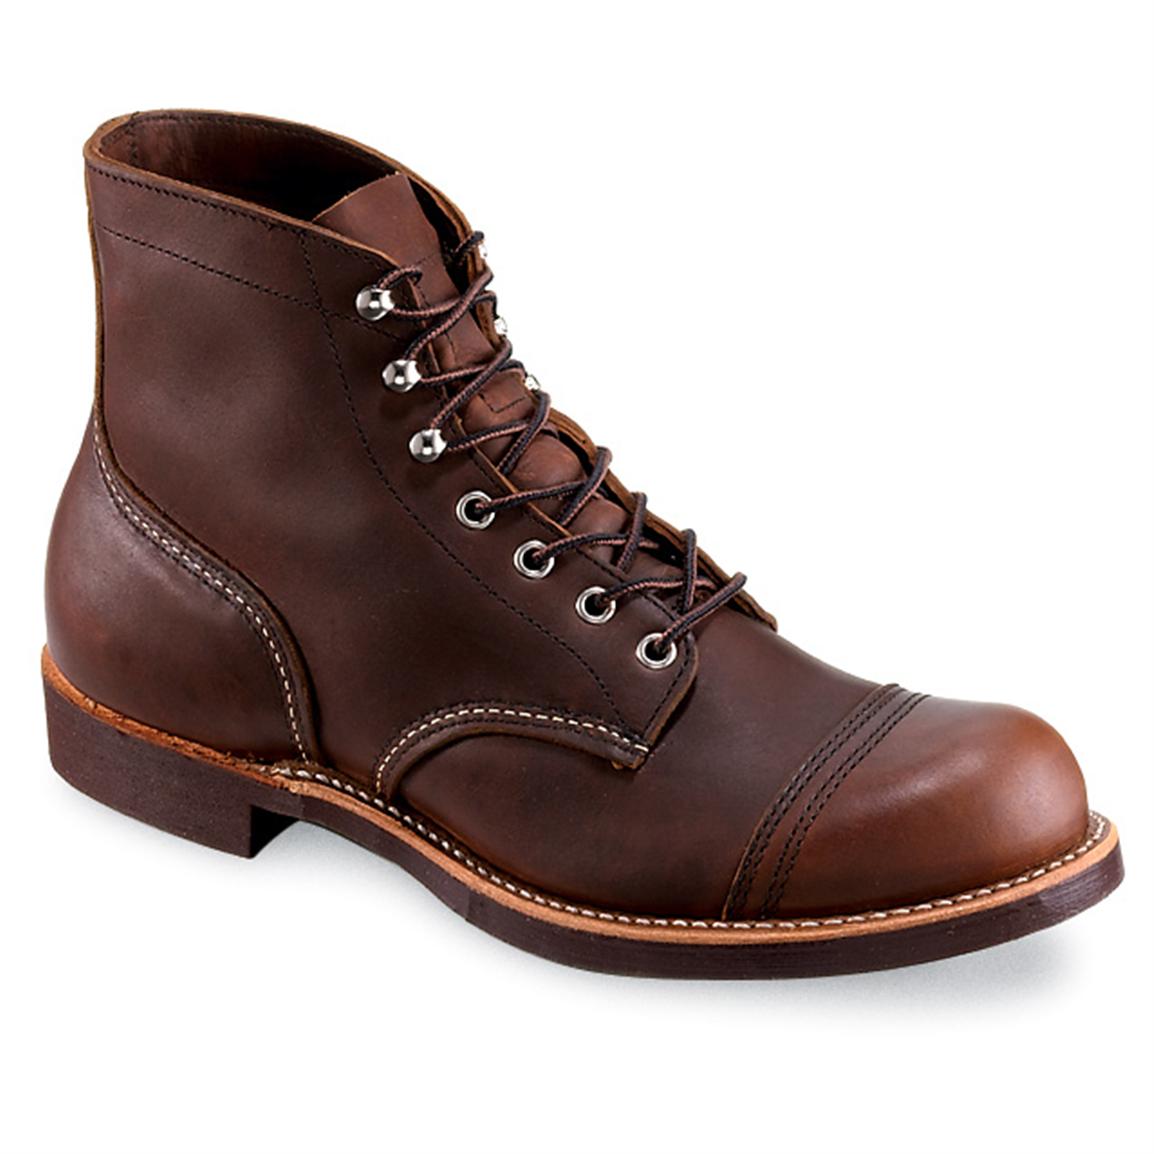 Men's Red Wing® Iron Ranger Boots - 148408, Work Boots at Sportsman's Guide